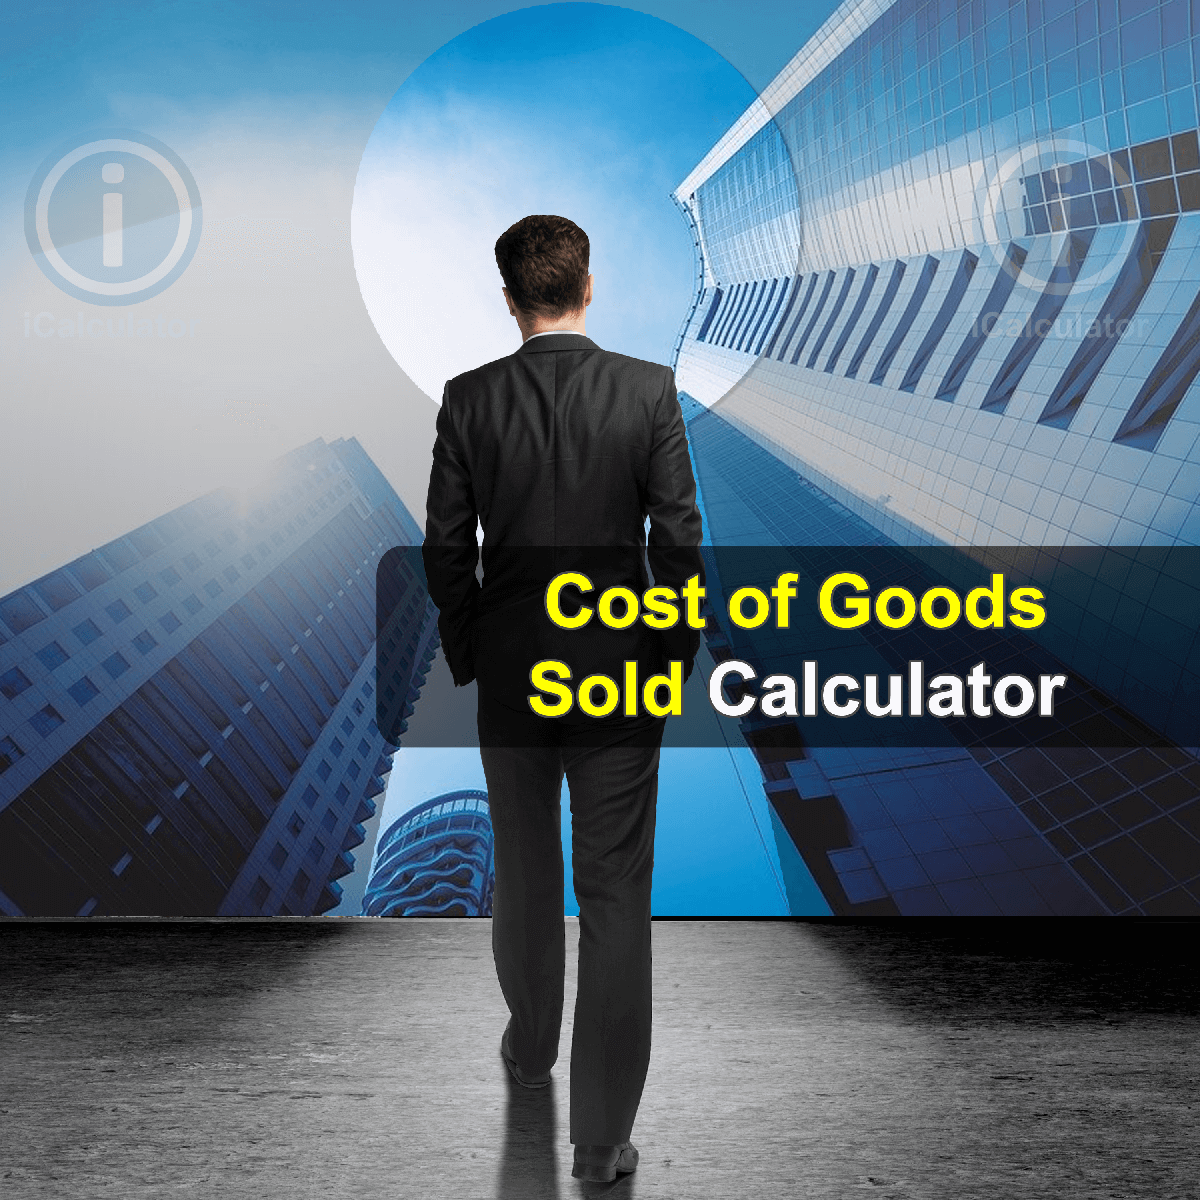 Cost of Goods Sold Calculator. This image provides details of how to calculate the Cost of Goods Sold using a calculator and notepad. By using the Cost of Goods Sold formula, the Cost of Goods Sold Calculator provides a true calculation of the cost that occurs in production and the cost of labor and any other cost that has a direct relation to the production of goods.